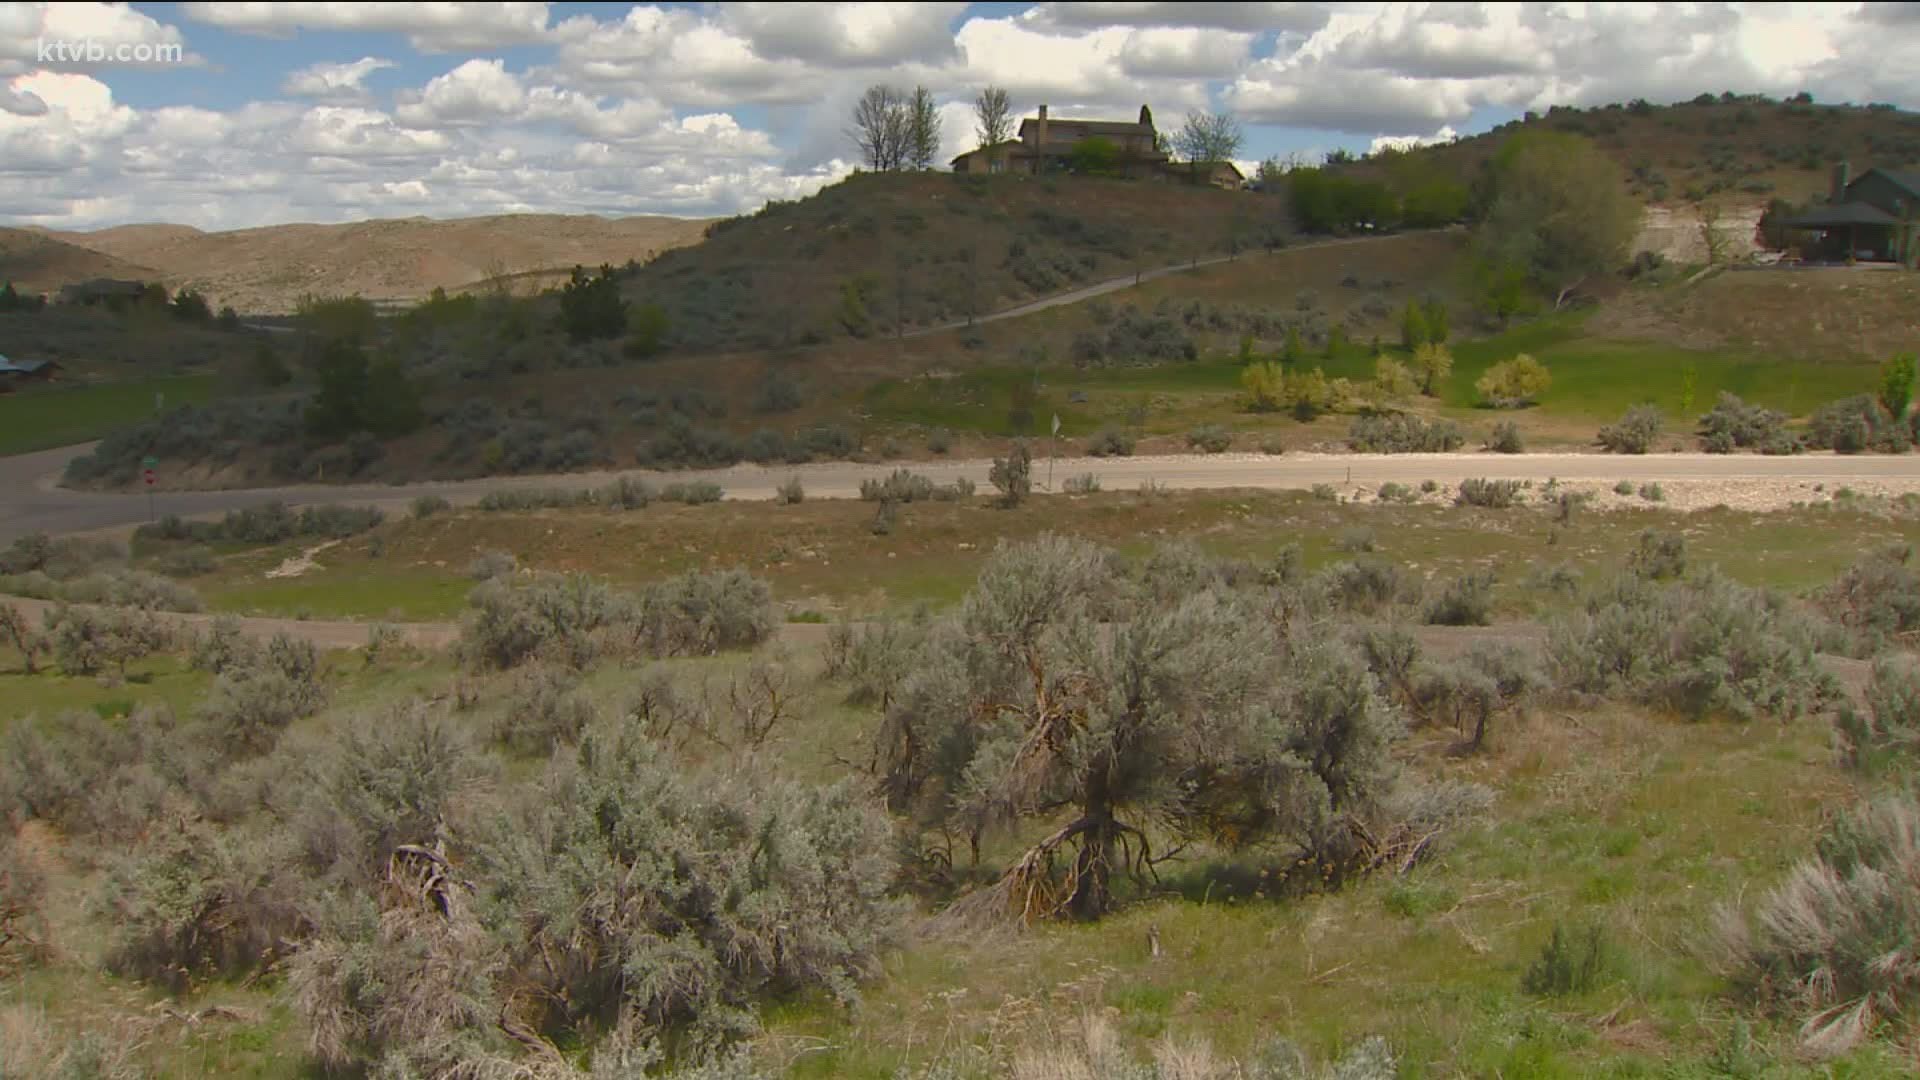 The department is offering free property evaluations to those live in or near the foothills.